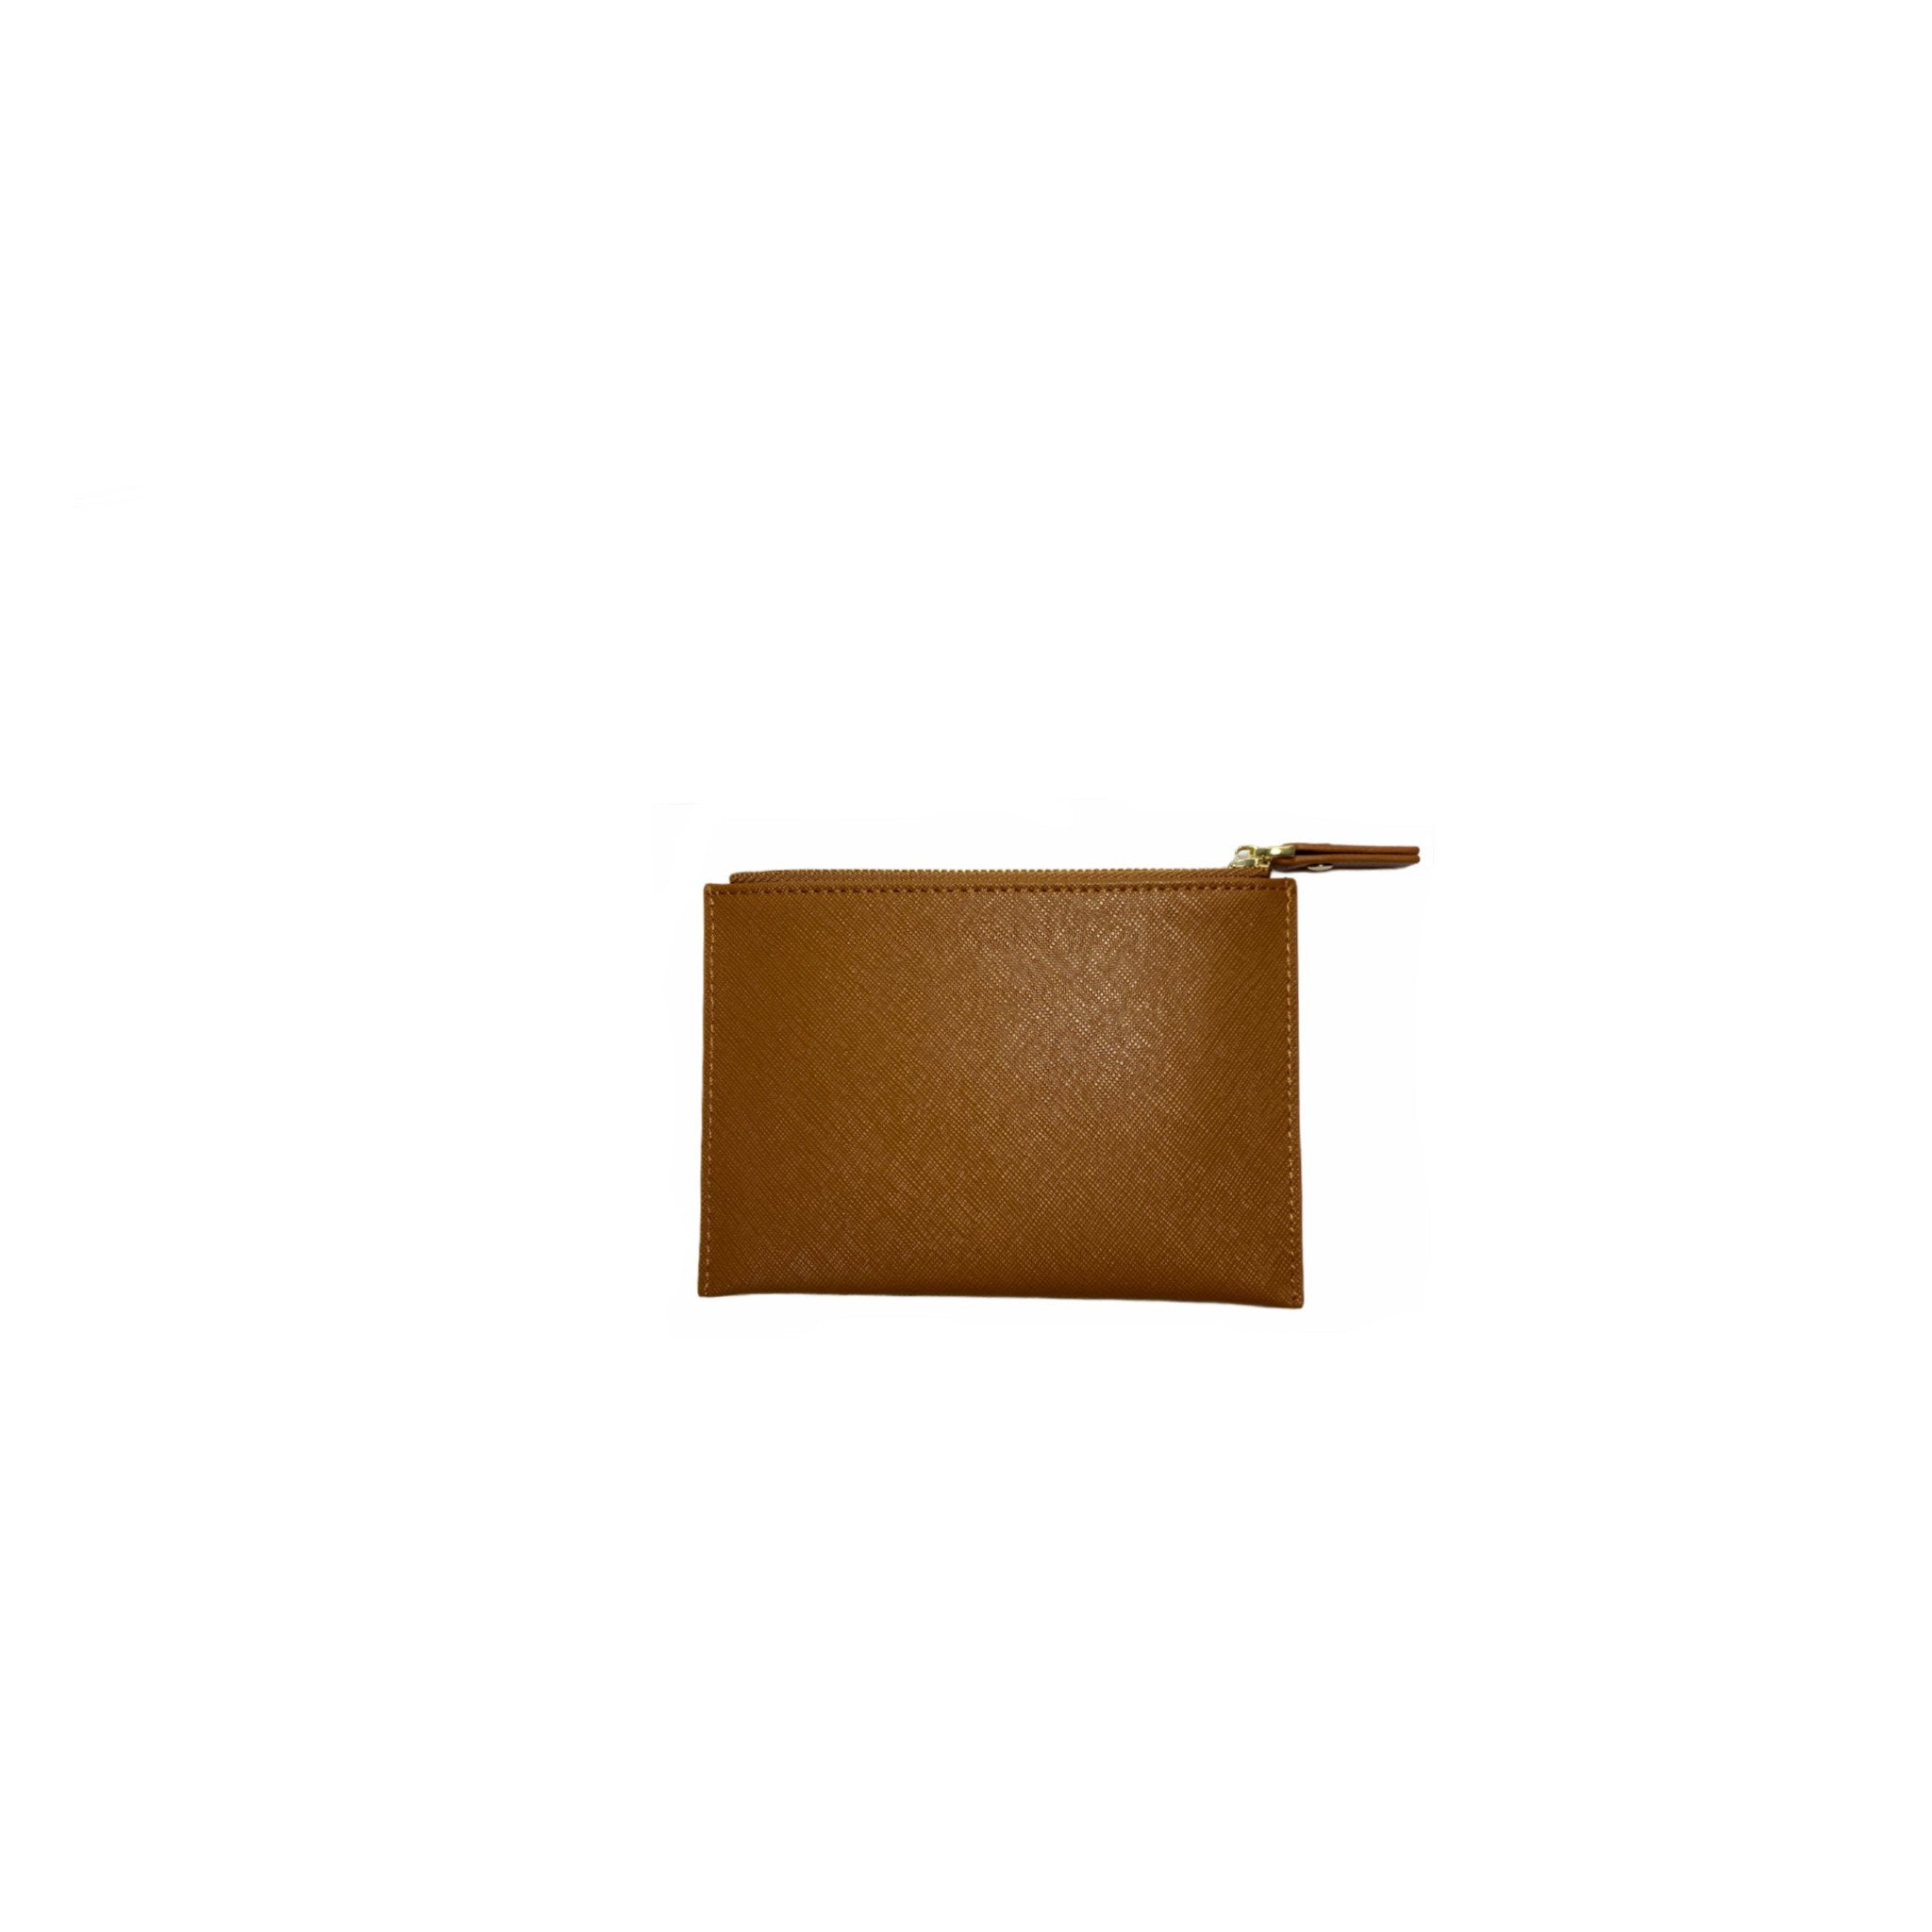 Personalised Coin Purse - Tan Saffiano Leather